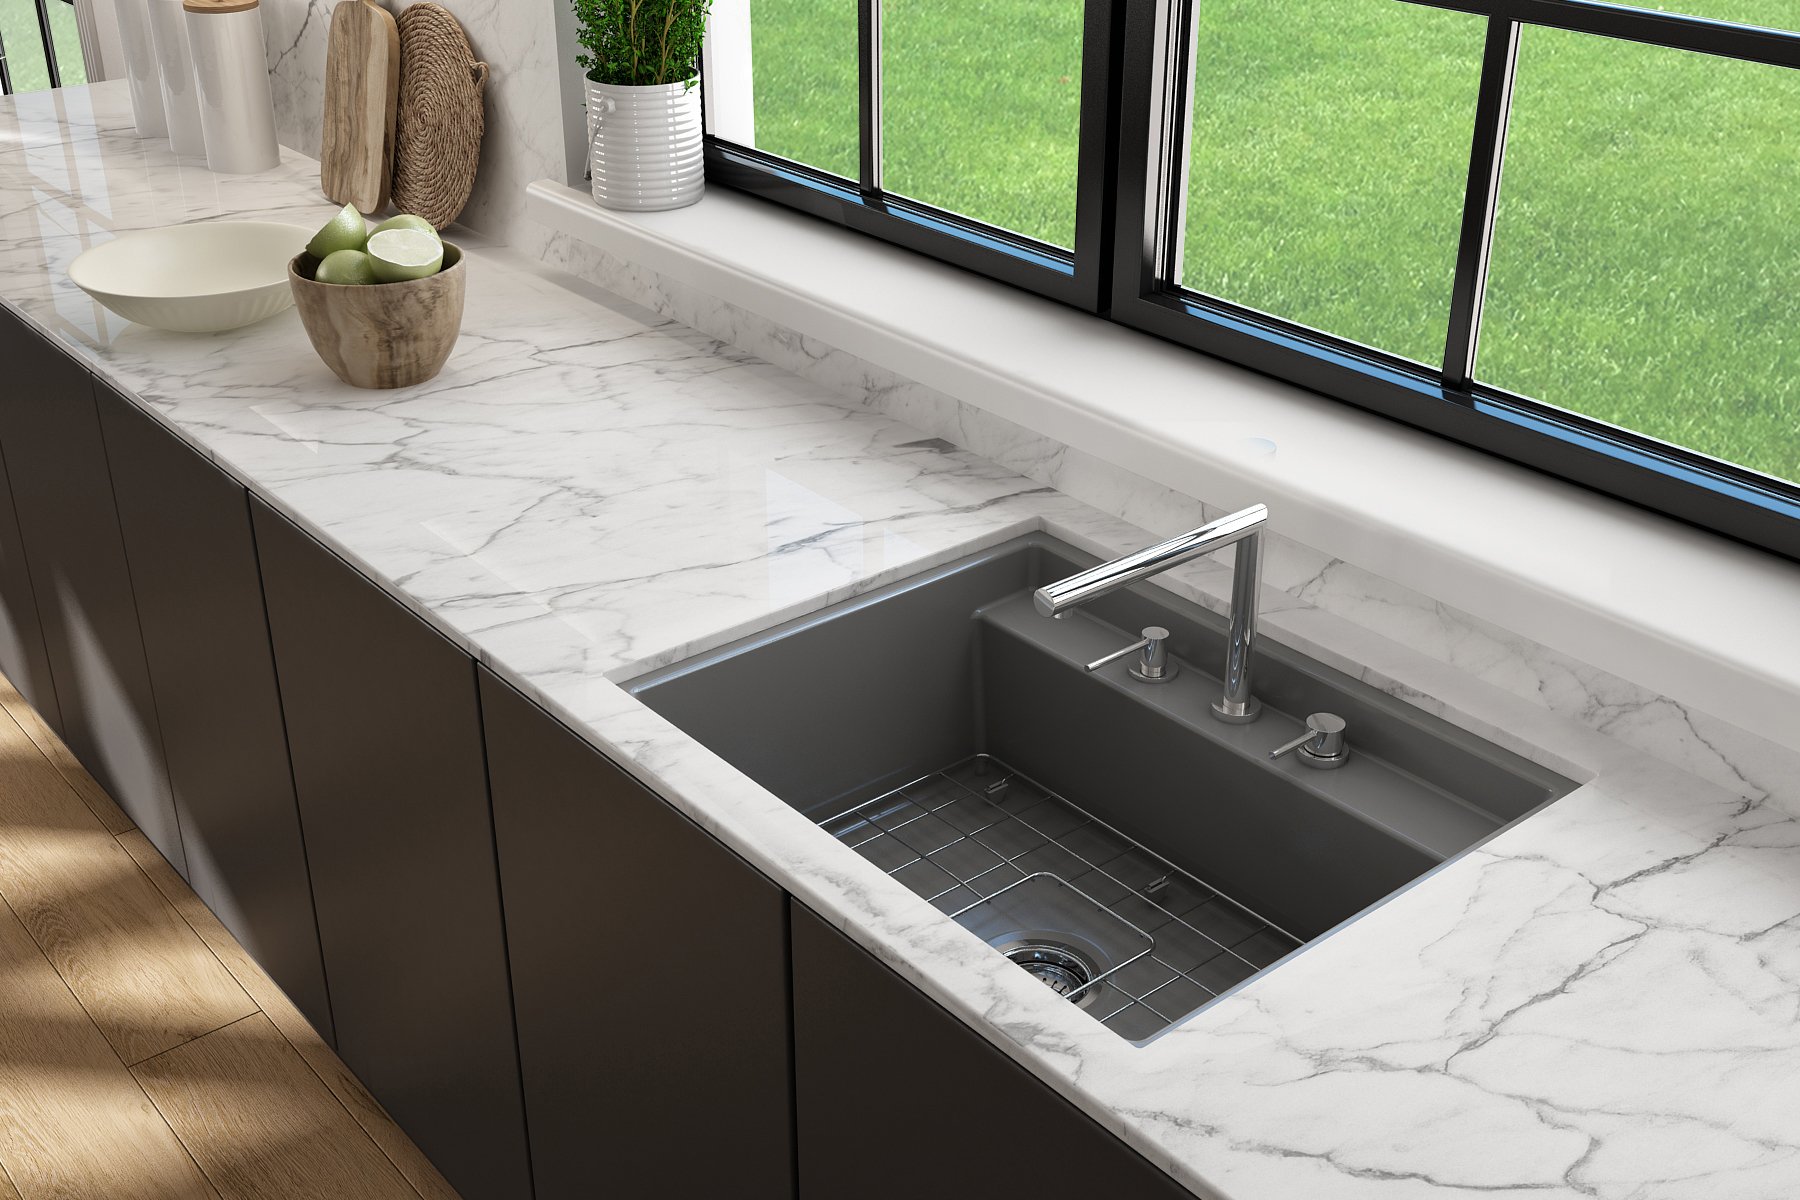 BAVENO 27 with Covers (3-hole faucet setting)